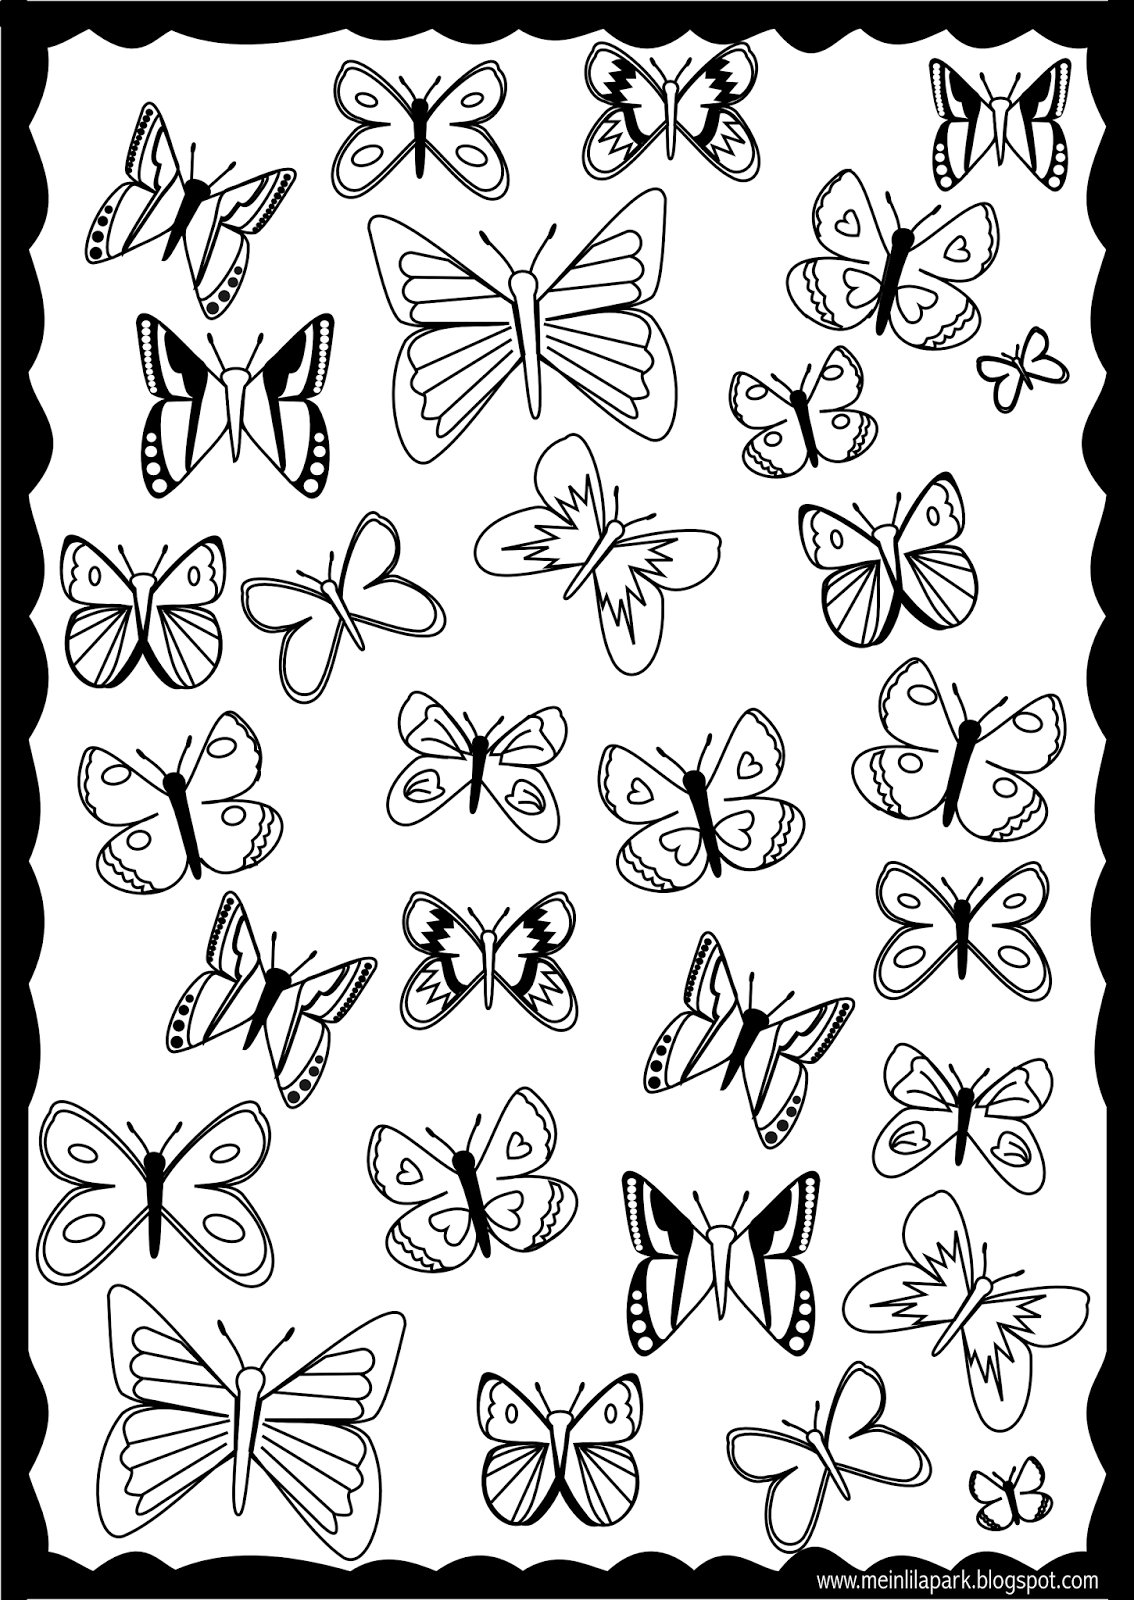 Free Pictures Of Butterflies Printable